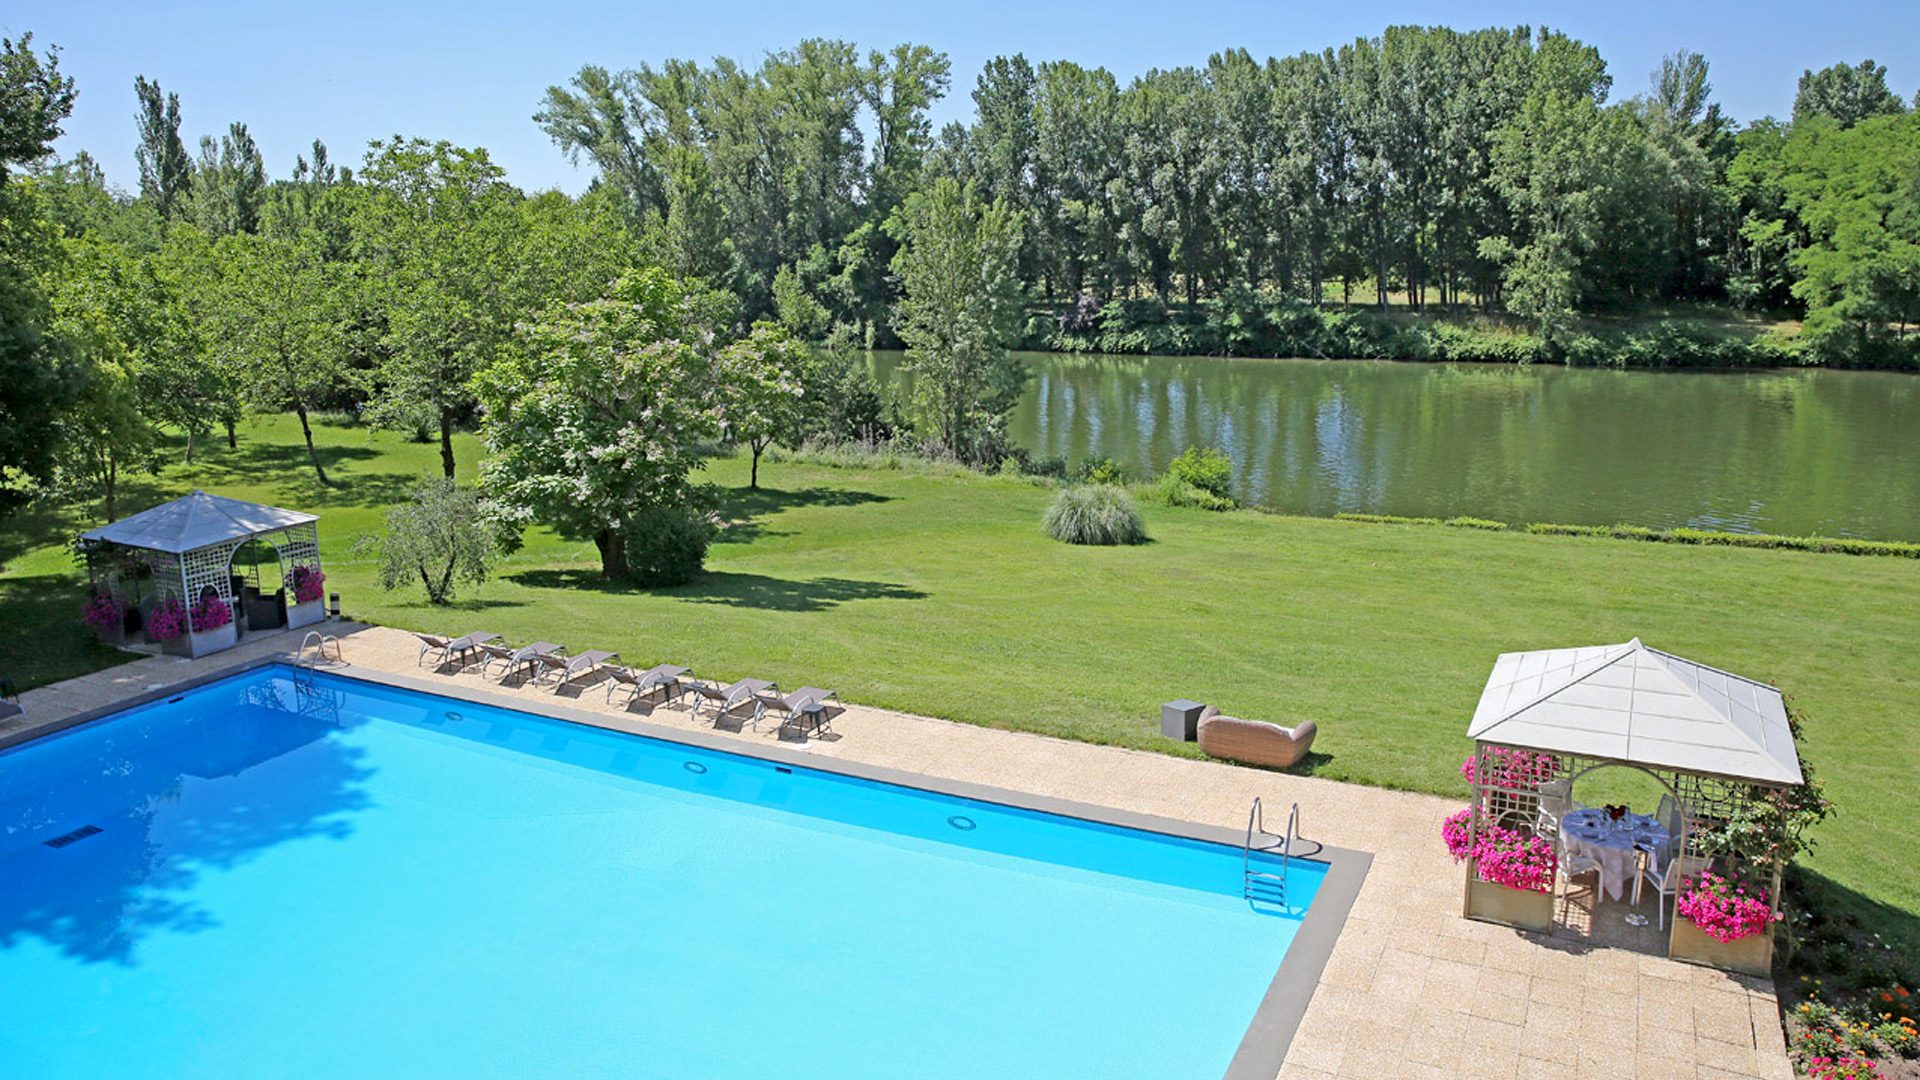 Stay in a hotel in Albi, on the banks of the Tarn